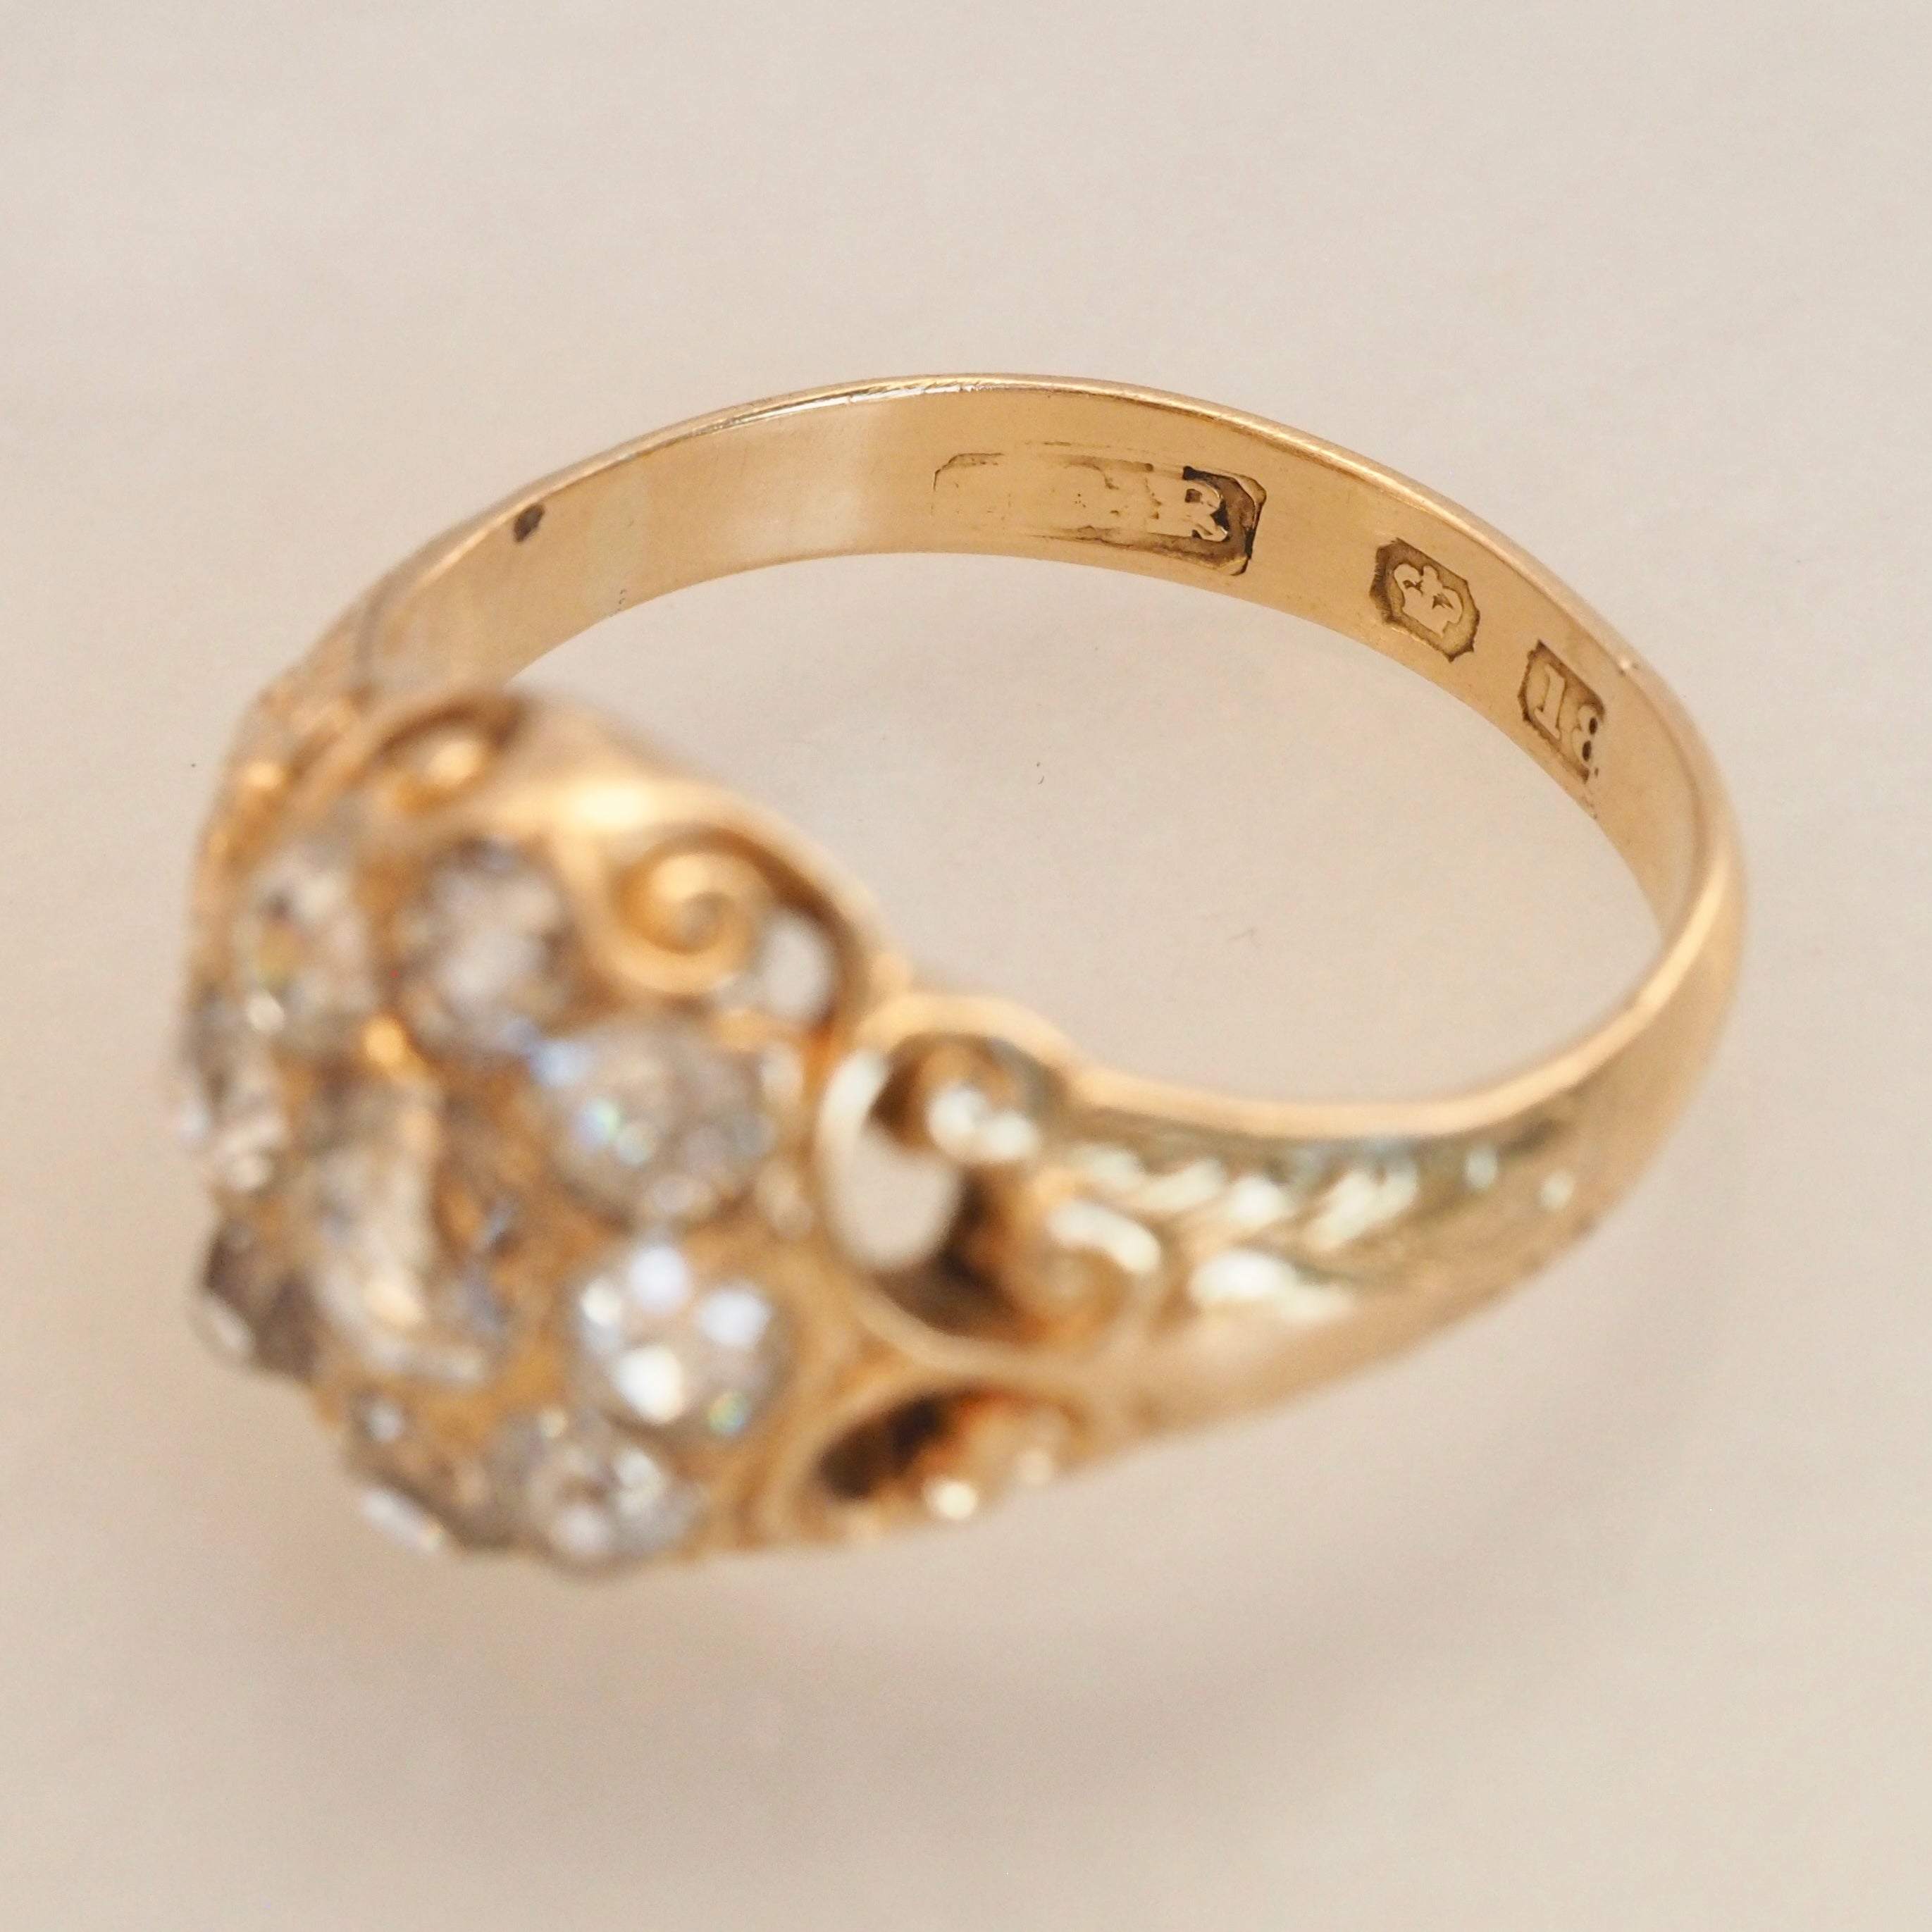 Antique Victorian 18k Gold Old Mine Cut Diamond Cluster Ring